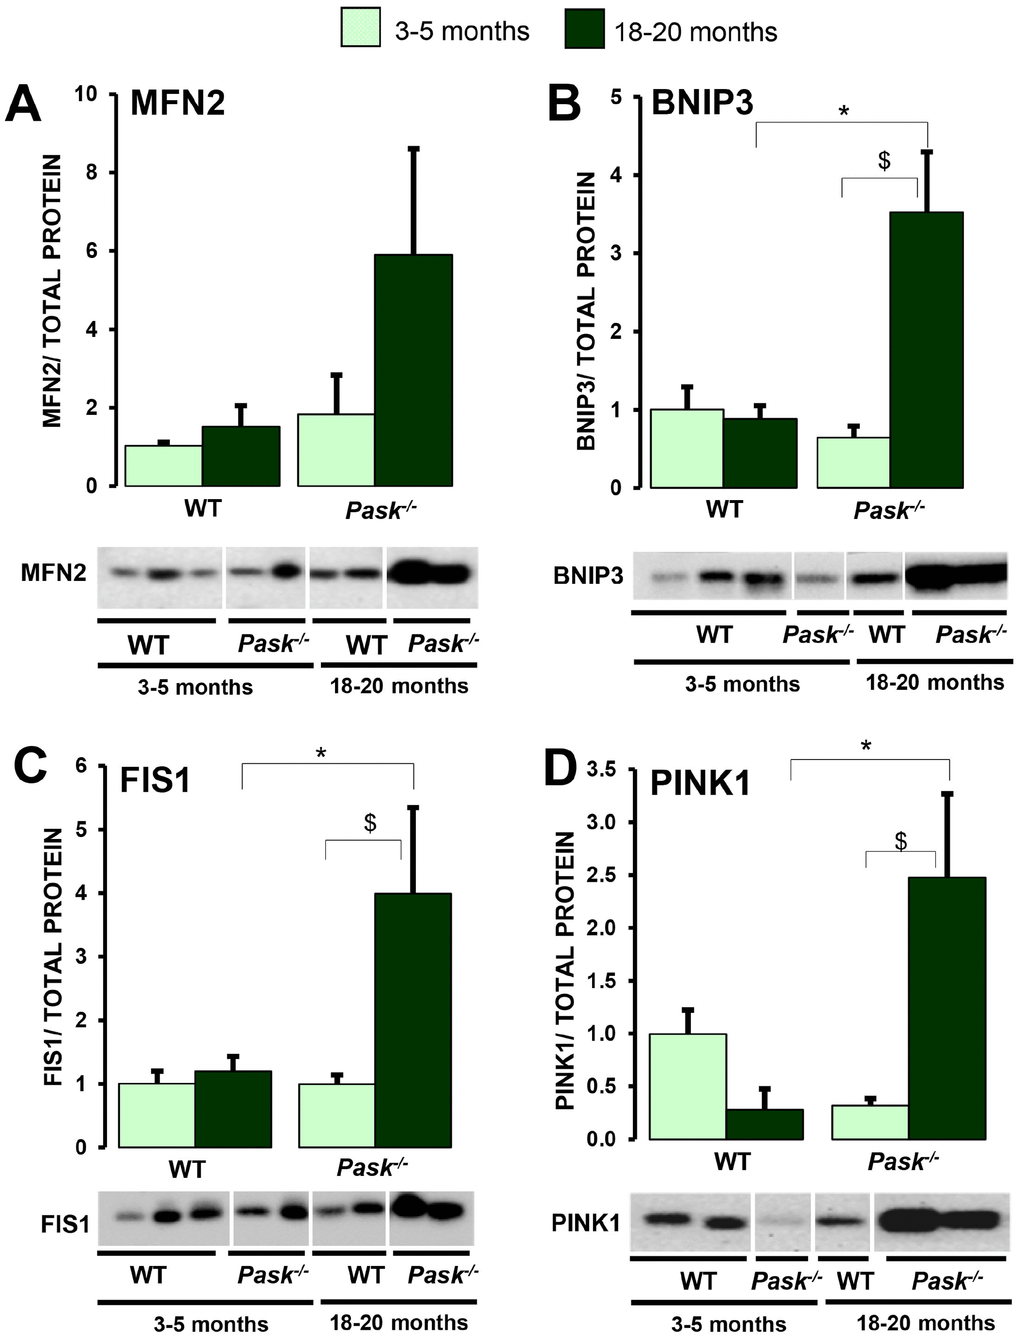 Effects of aging and PASK deficiency on MFN2, FIS1, BNIP3 and PINK1 protein expression. Immunoblot analysis of MFN2 (A), FIS1 (B), BNIP3 (C) and PINK1 (D) in livers from young (3-5 months) and aged (18-20 months) wild-type (WT) and PASK-deficient (Pask-/-) mice. Liver lysates from non-fasted (NF) mice were processed for western blot analysis. The value obtained in 3-5-month-old non-fasted WT mice was taken as 1. Bar graphs in (A–D) represent the means ± SEM of the densitometric values normalized by total protein detected by Stain-Free (TOTAL PROTEIN) (Supplementary Figure 2), n = 4-5 animals per condition. $P vs. 18-20 months; * P vs. Pask-/-.